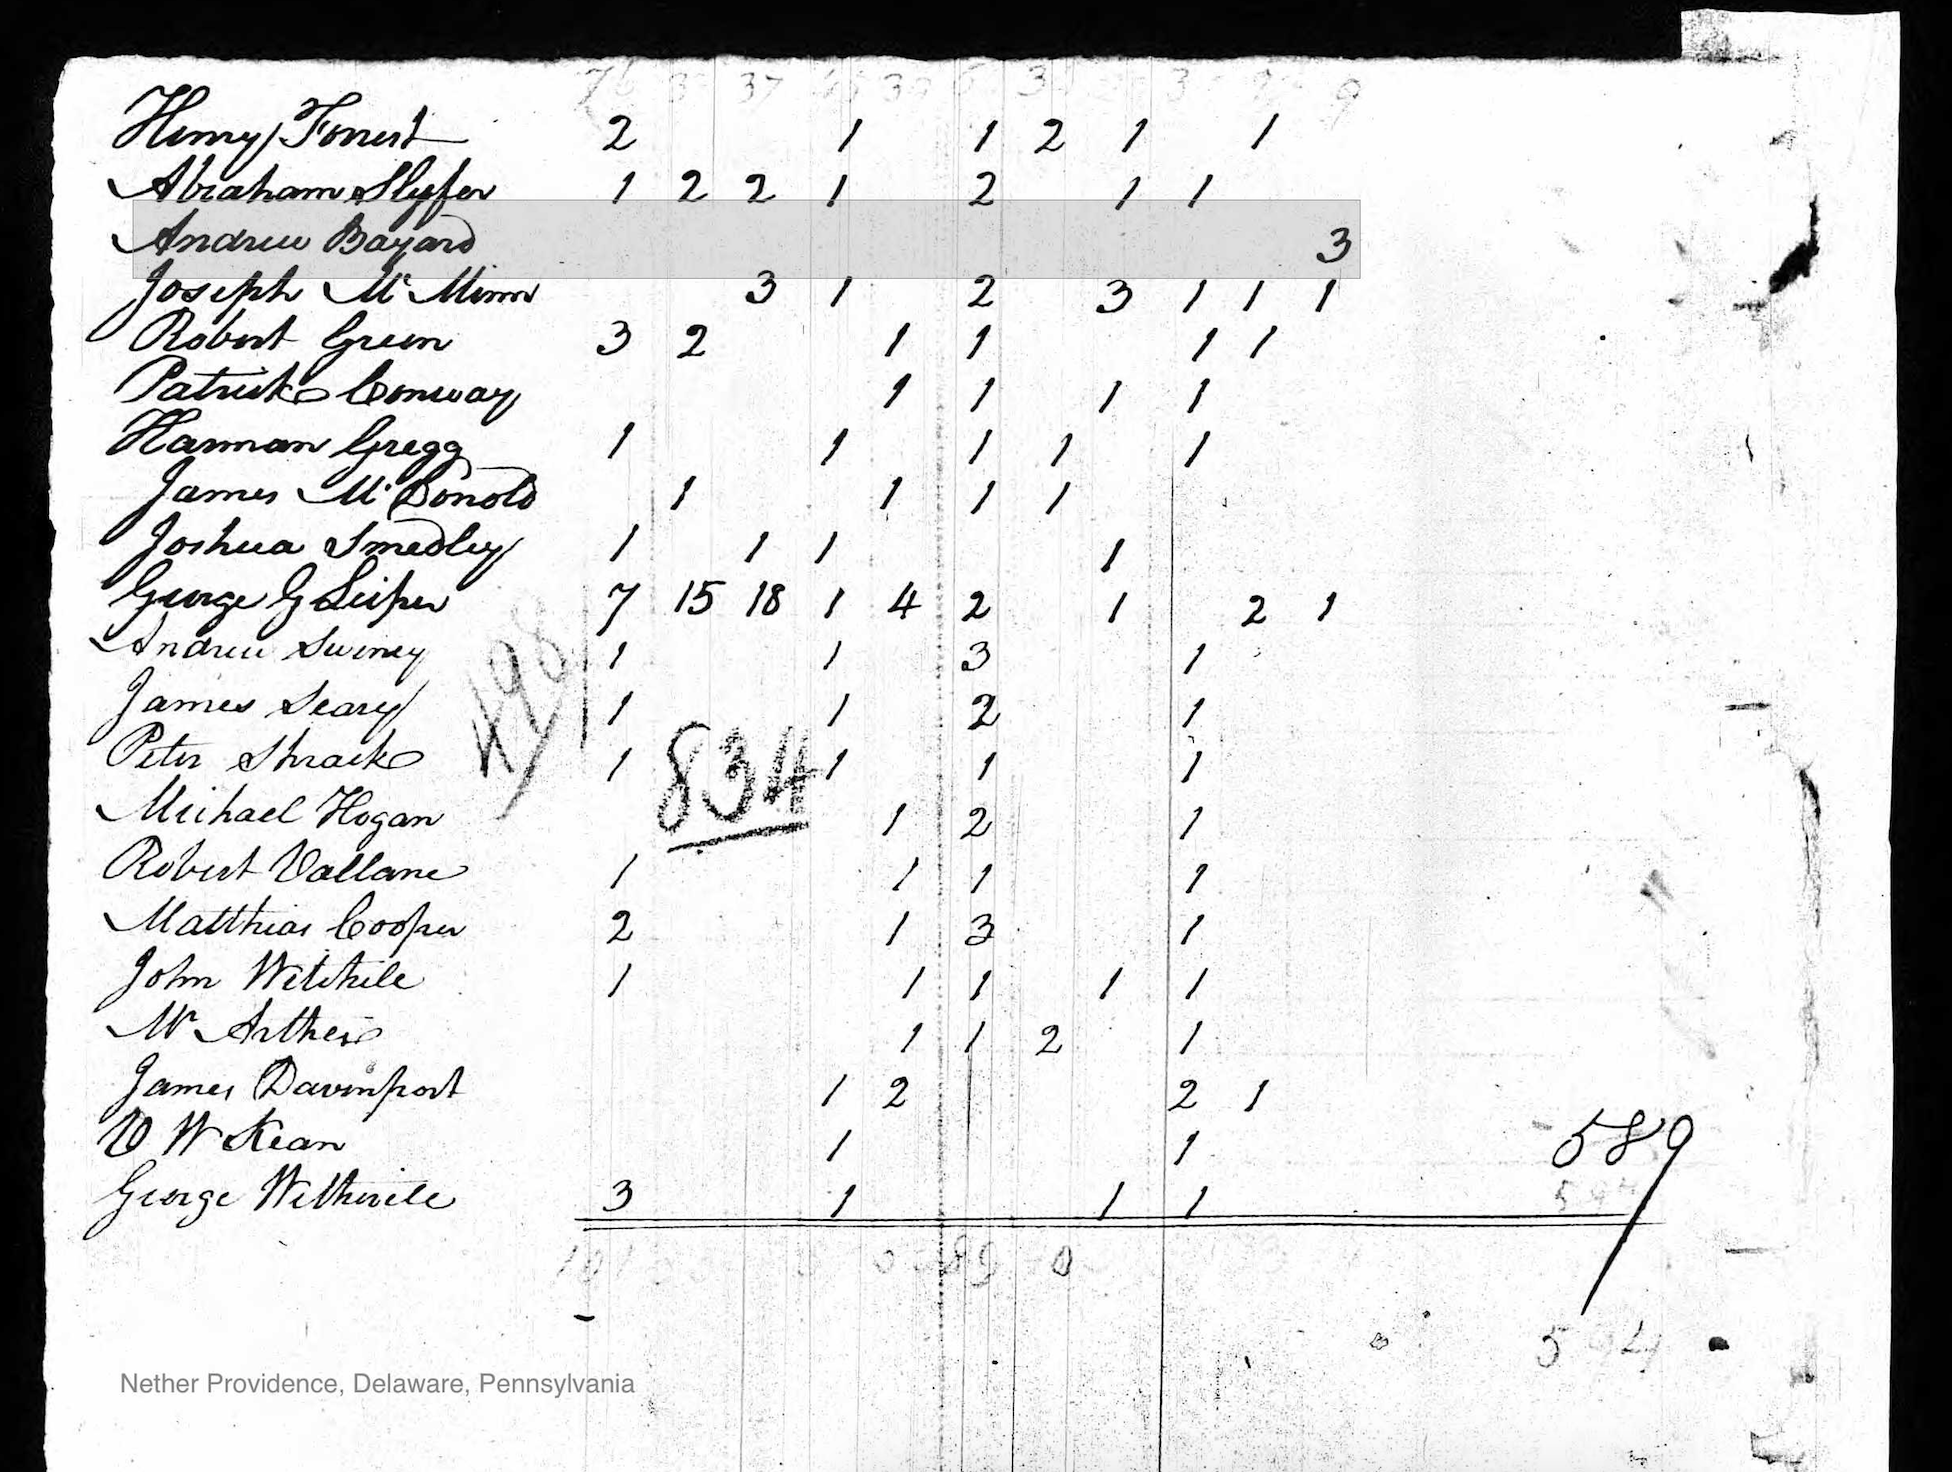 1810 Census Entry for Andrew Bayard